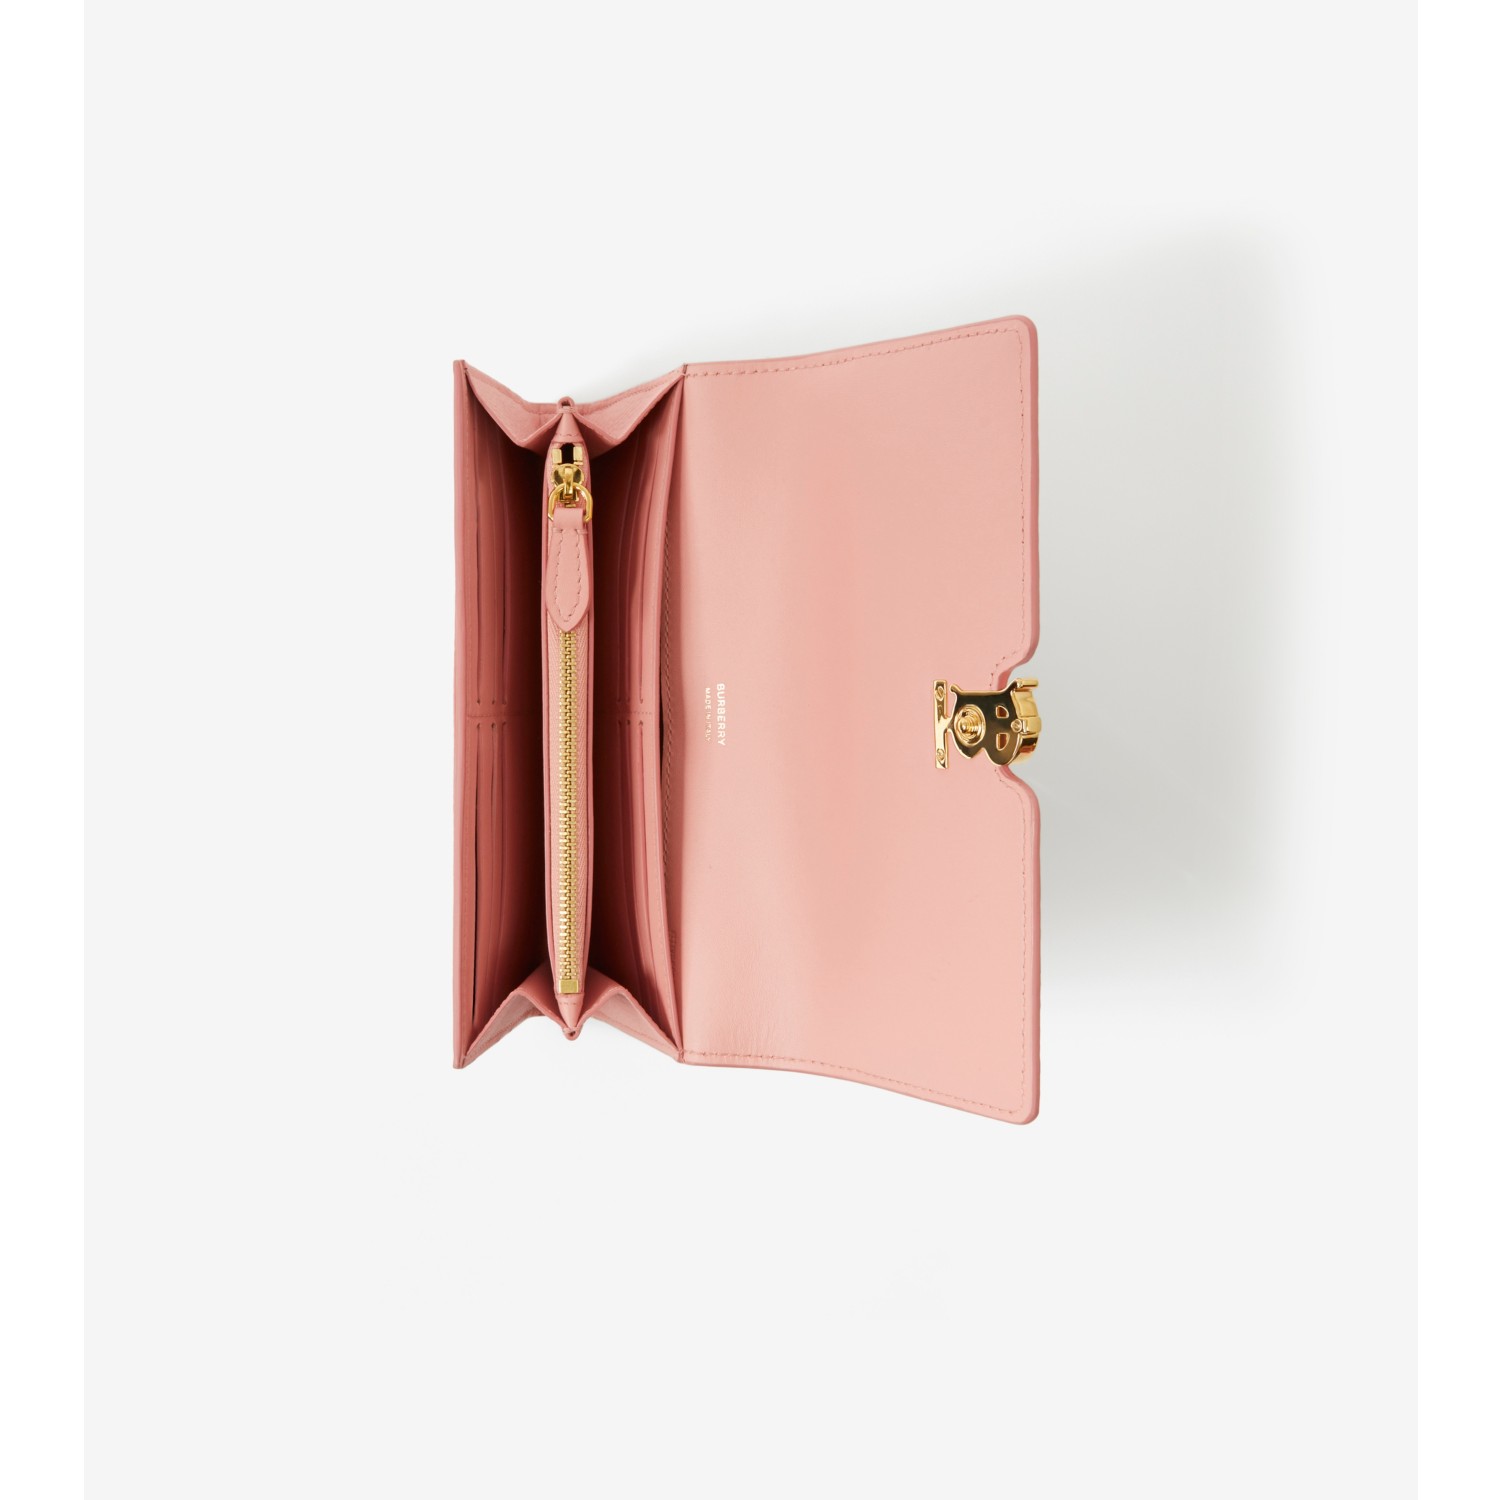 Burberry pink Leather TB Monogram Continental Wallet